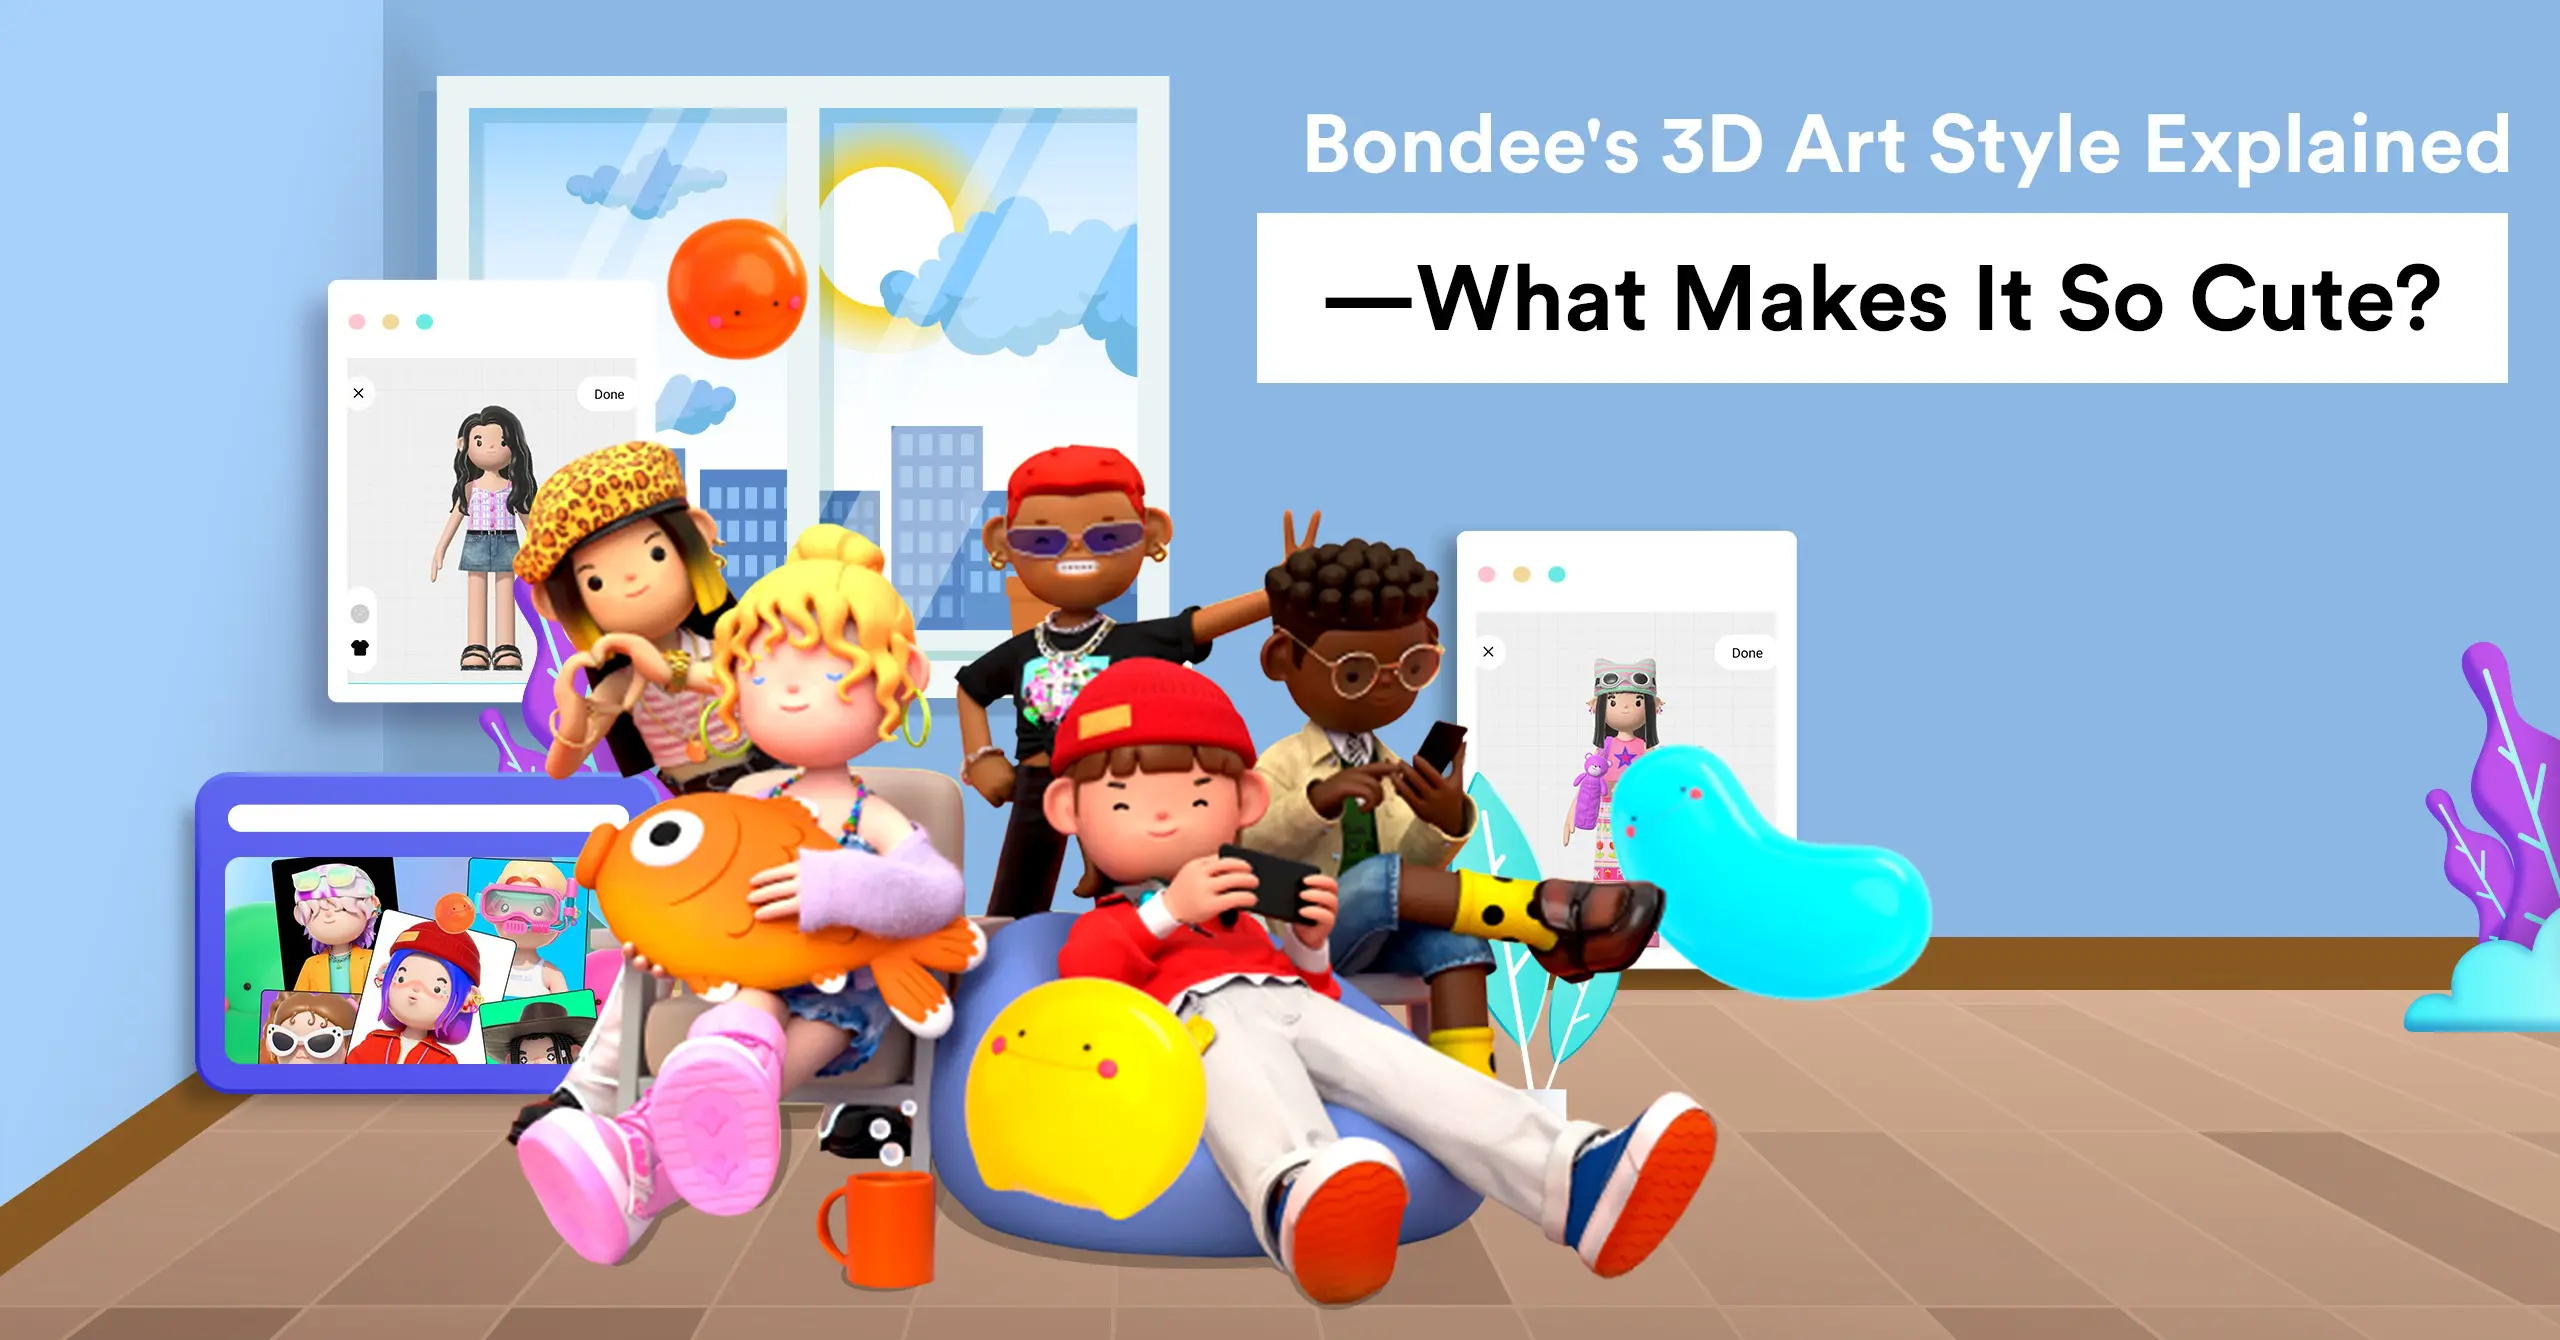 Bondee’s 3D Art Style Explained—What Makes It So Cute?